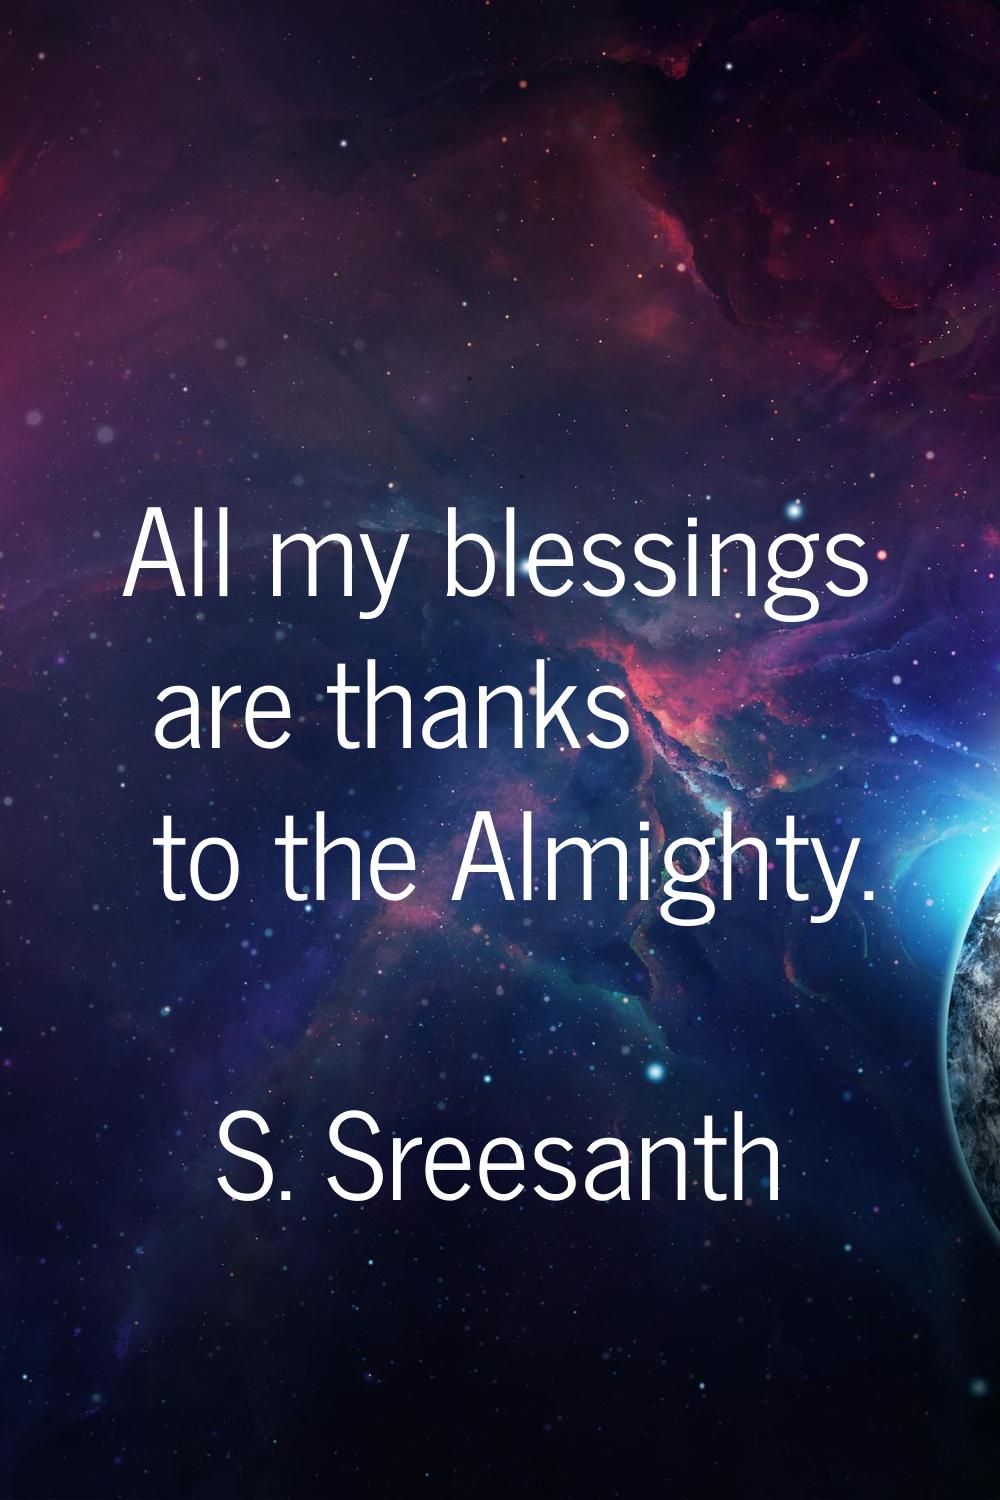 All my blessings are thanks to the Almighty.